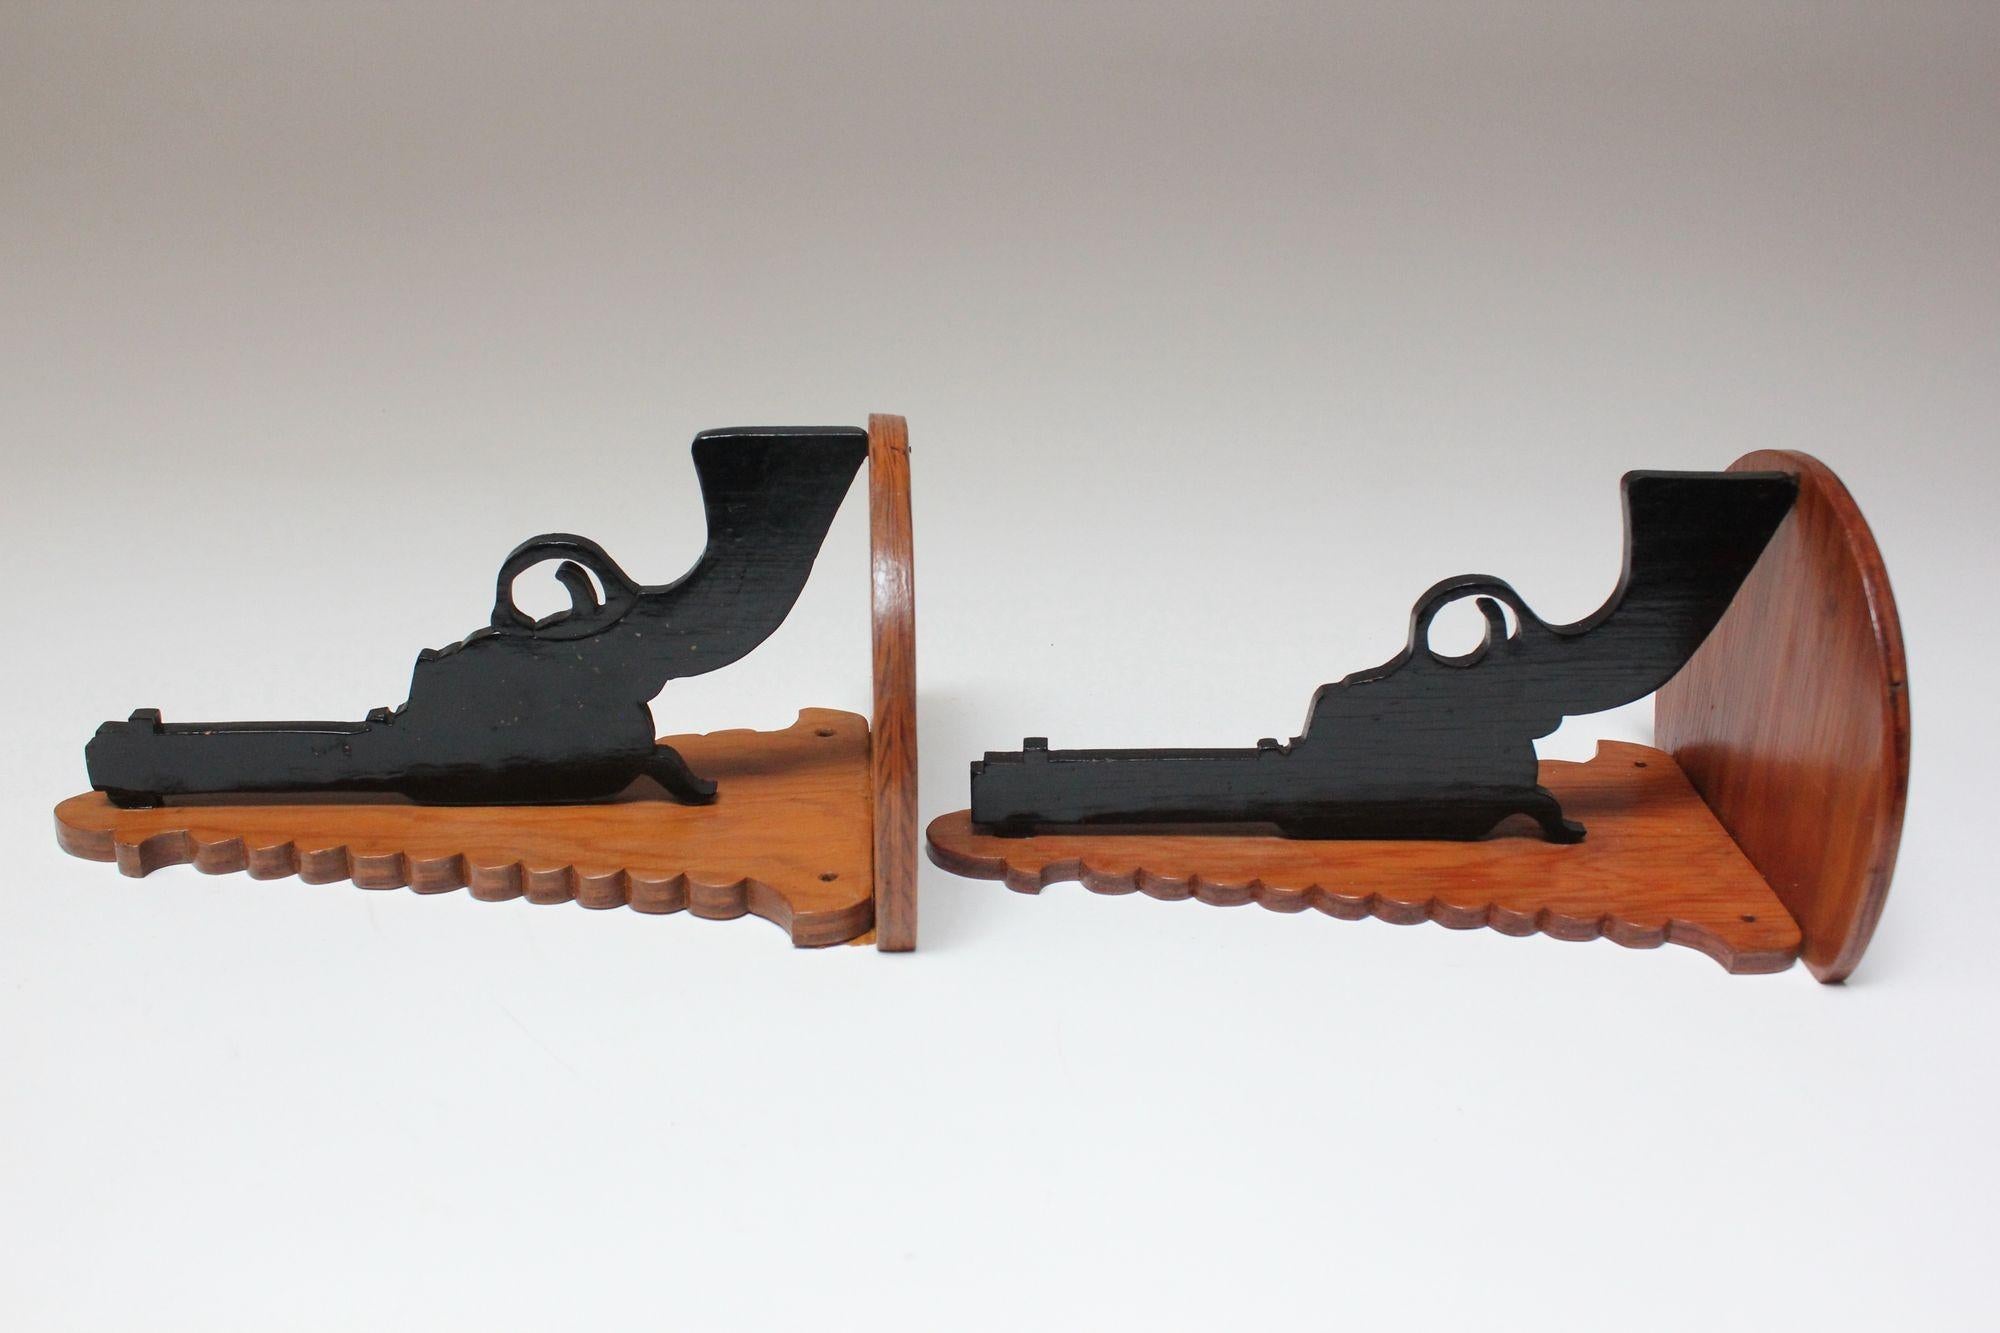 Plywood Pair of Hand-Carved and Painted Folk Art Pistol Wall Brackets / Corner Shelves For Sale